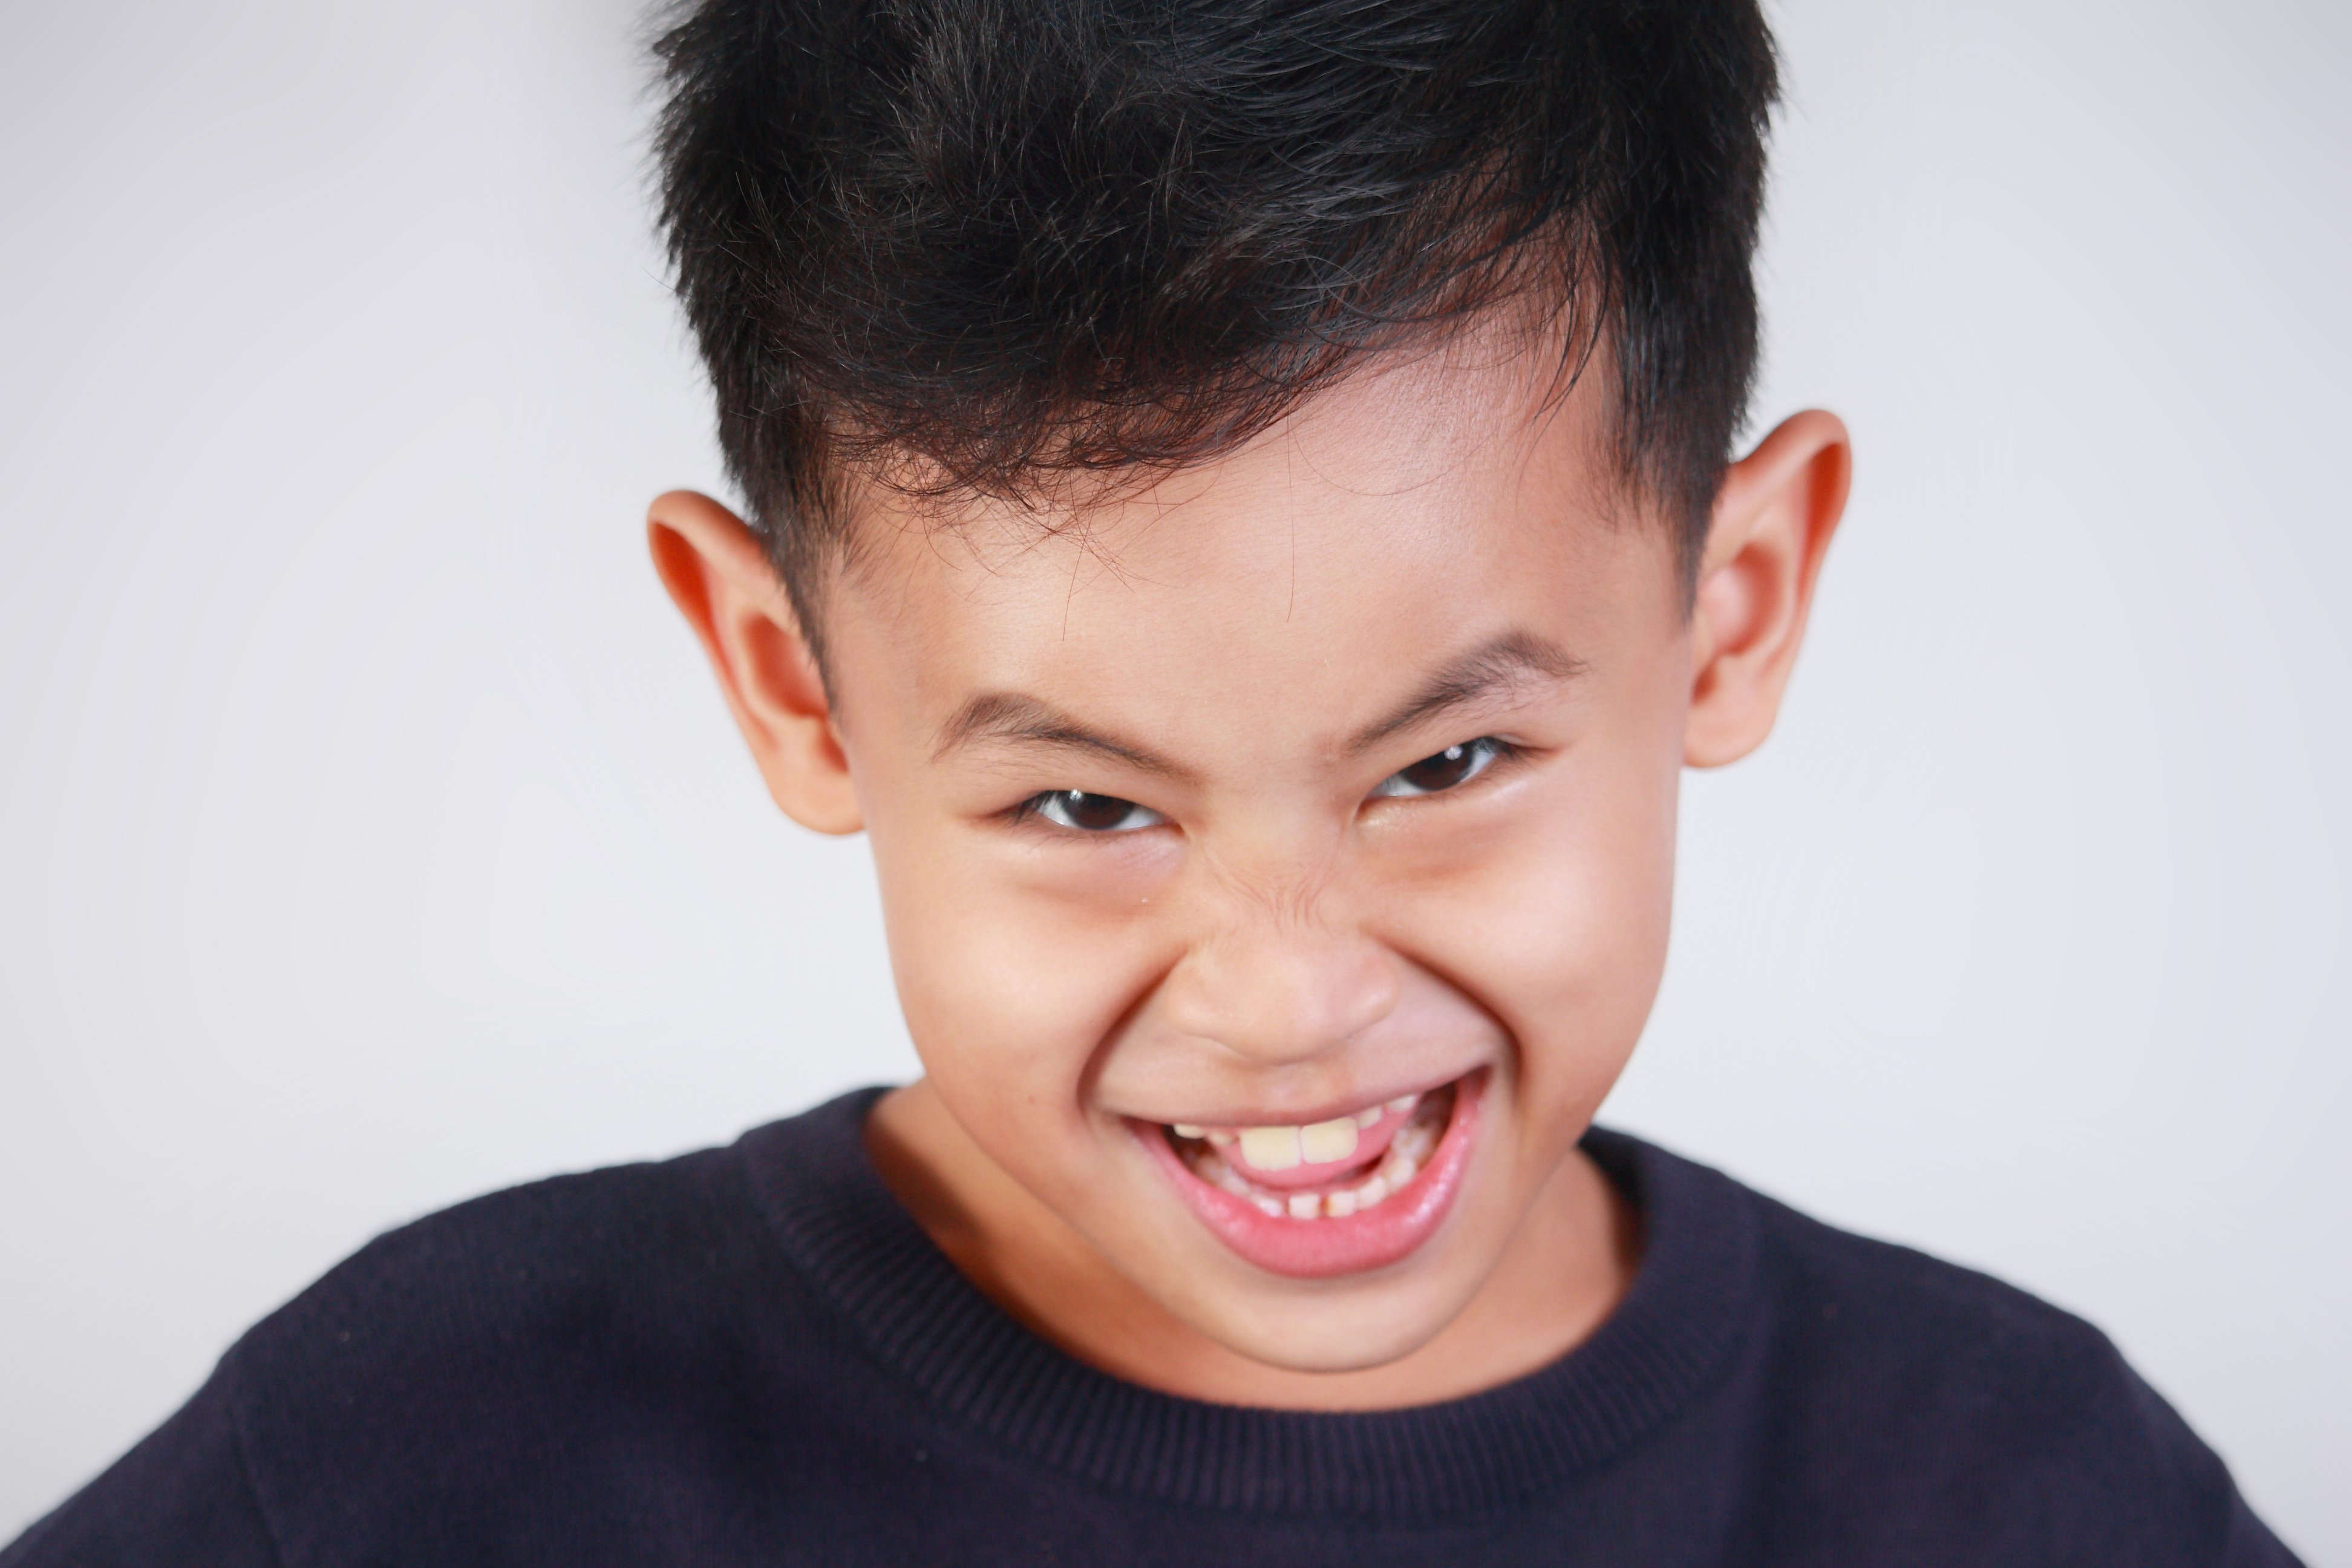 Dark haired boy with naughty facial expression. | Photo: Shutterstock